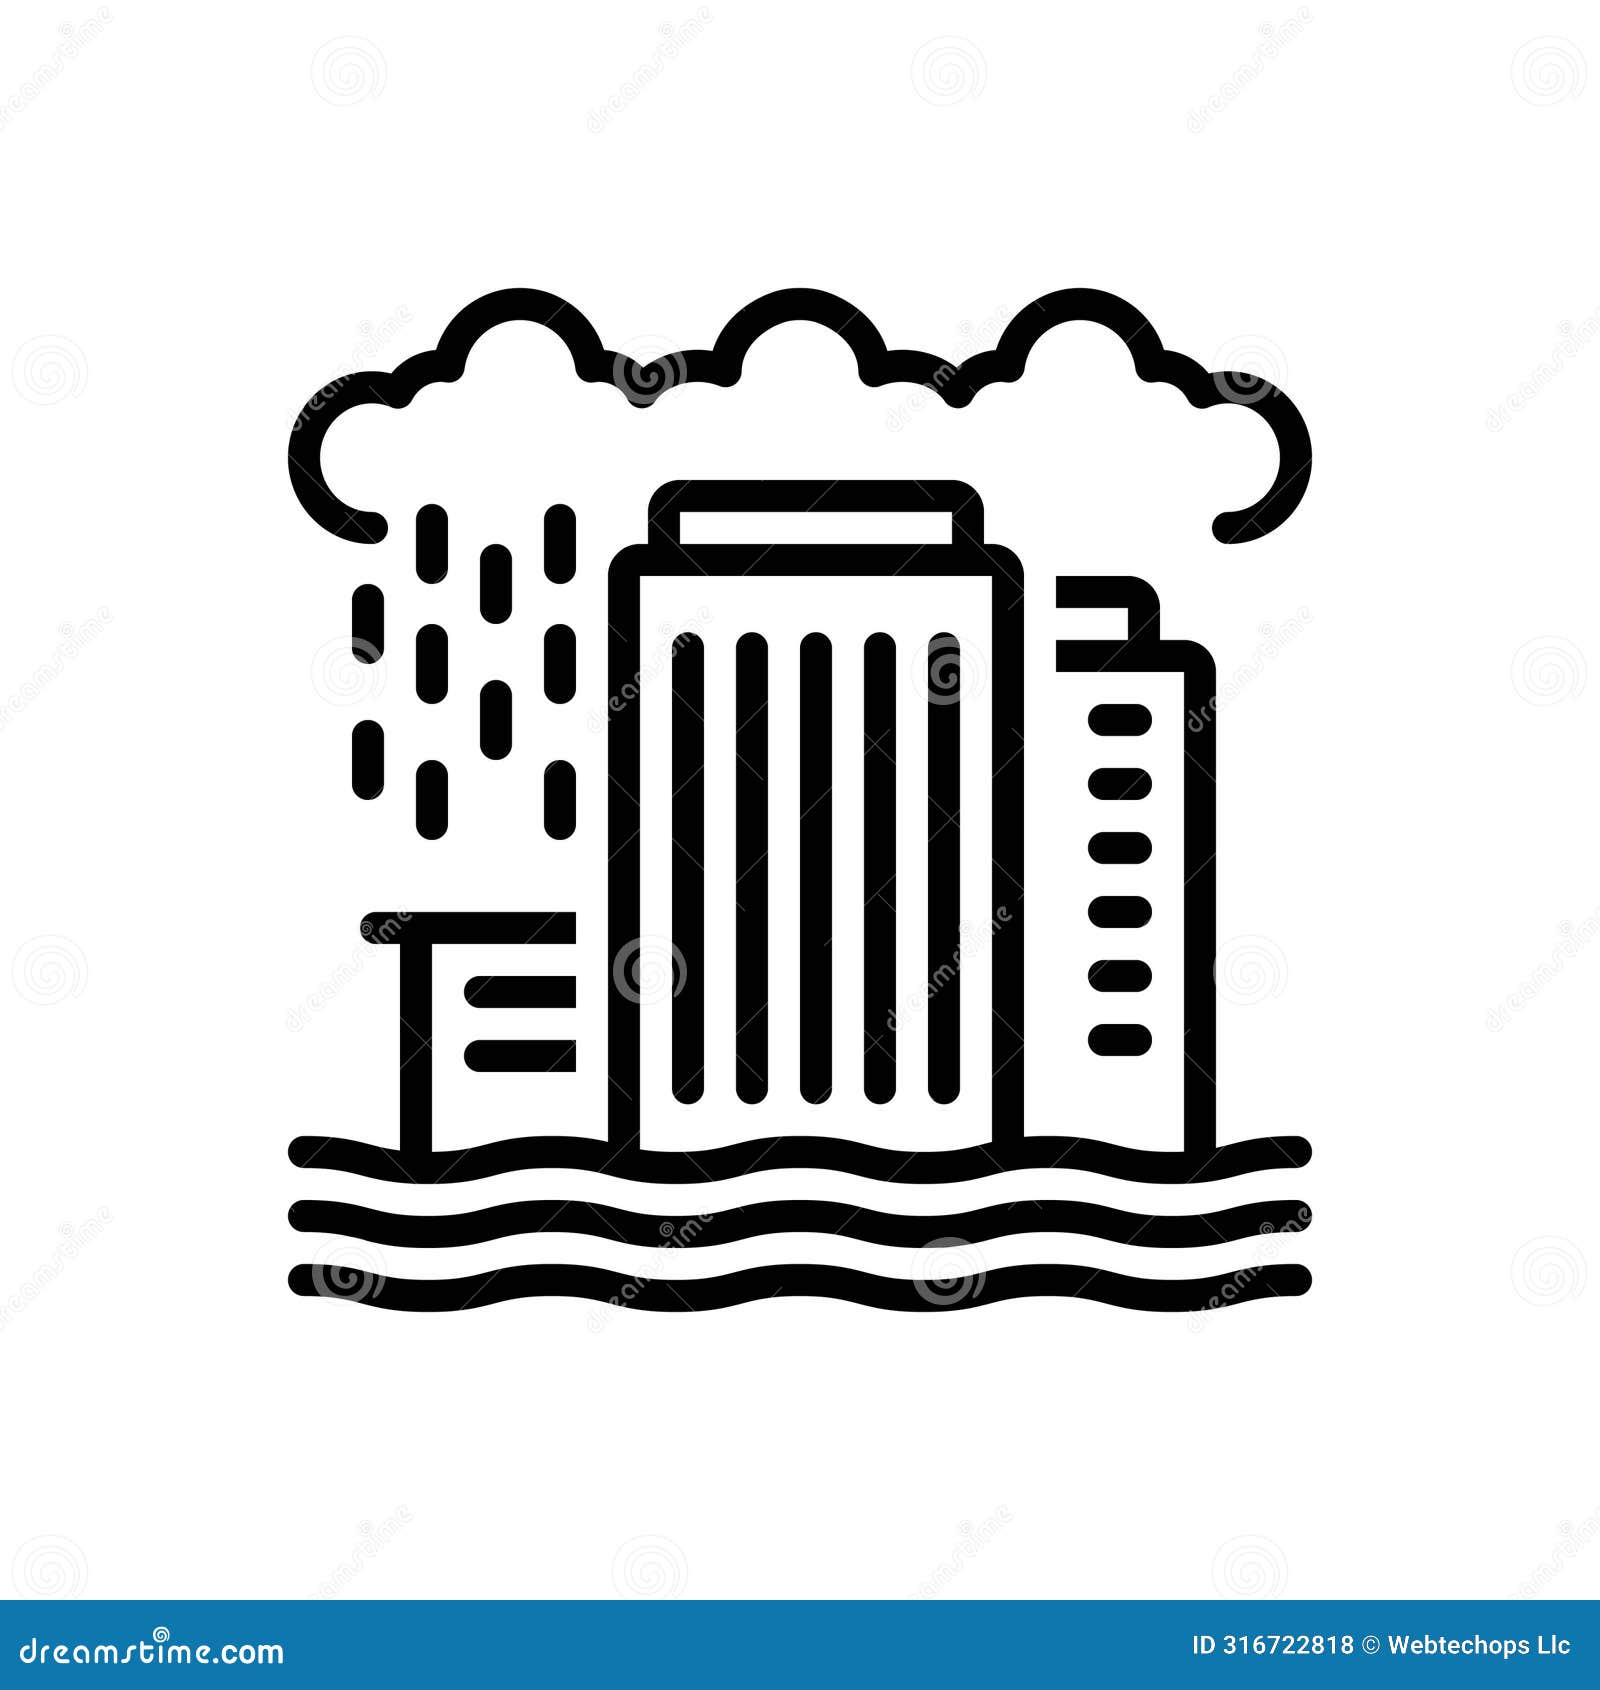 black line icon for flooding, deluge and flood